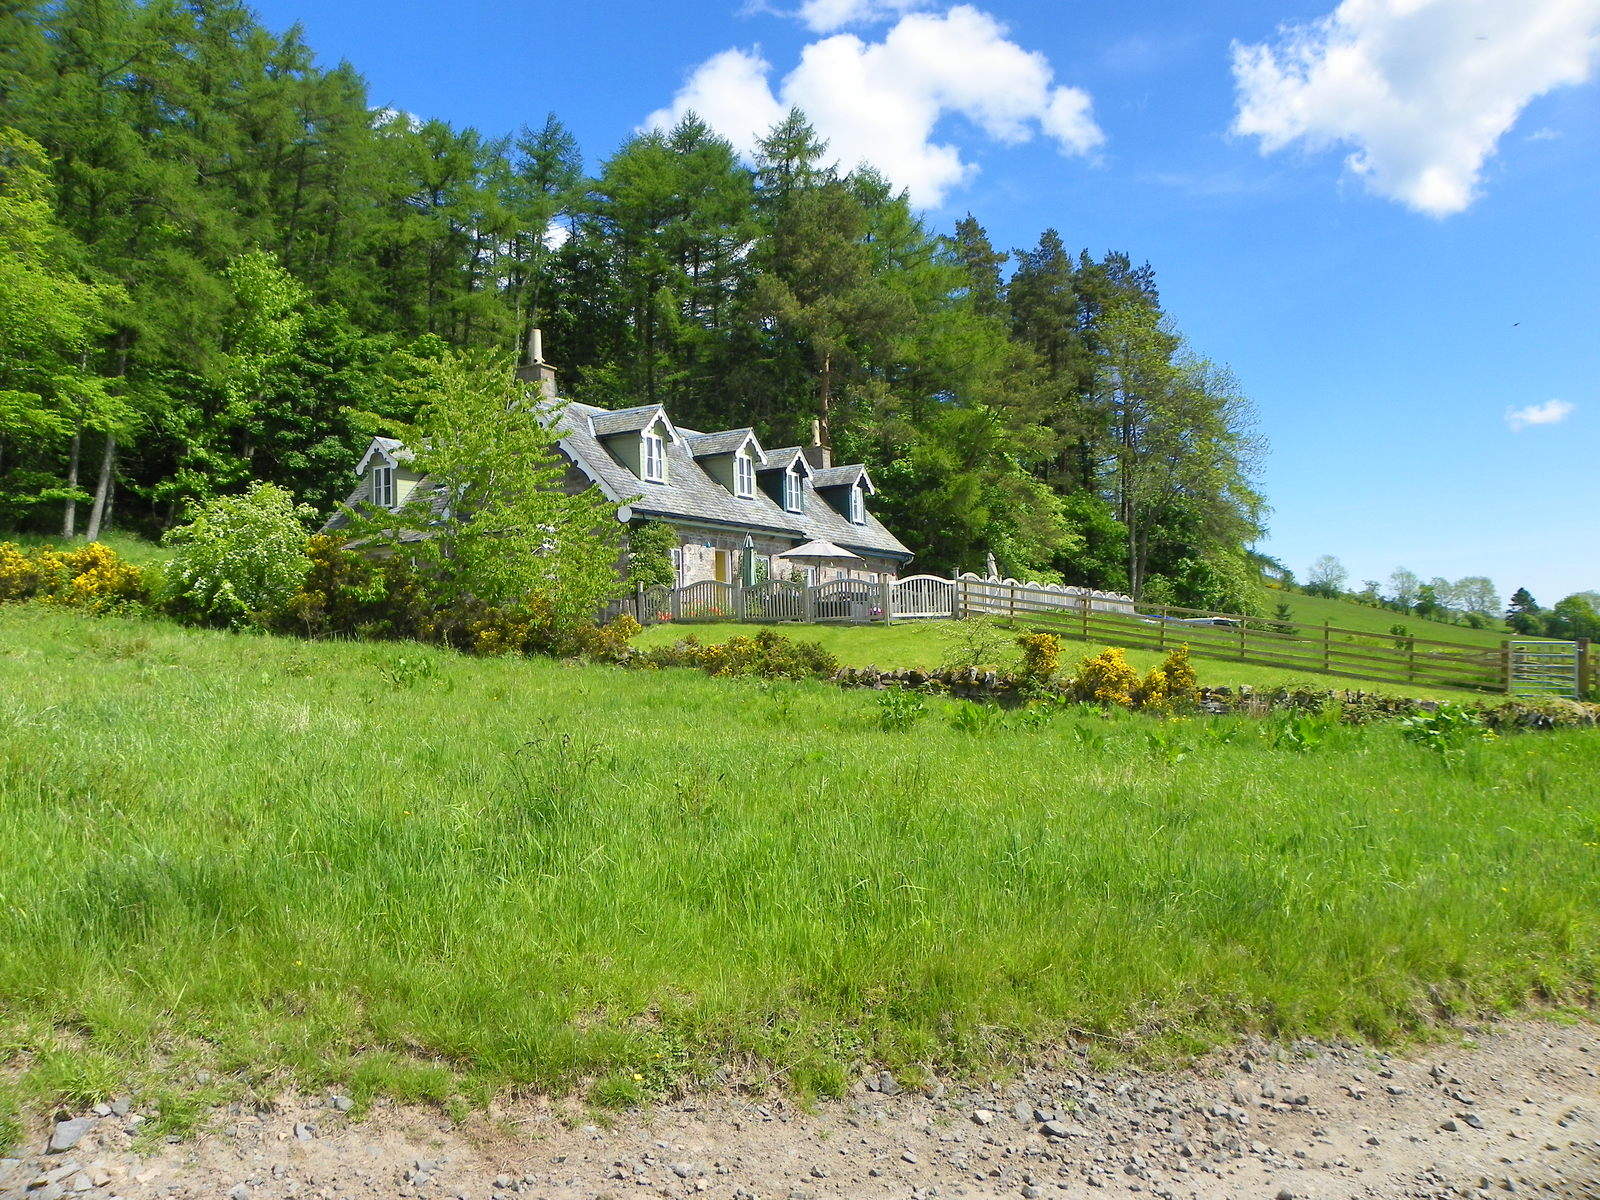 A luxury self-catering holiday at Blairmore Farm in Perth and Kinross, Scotland